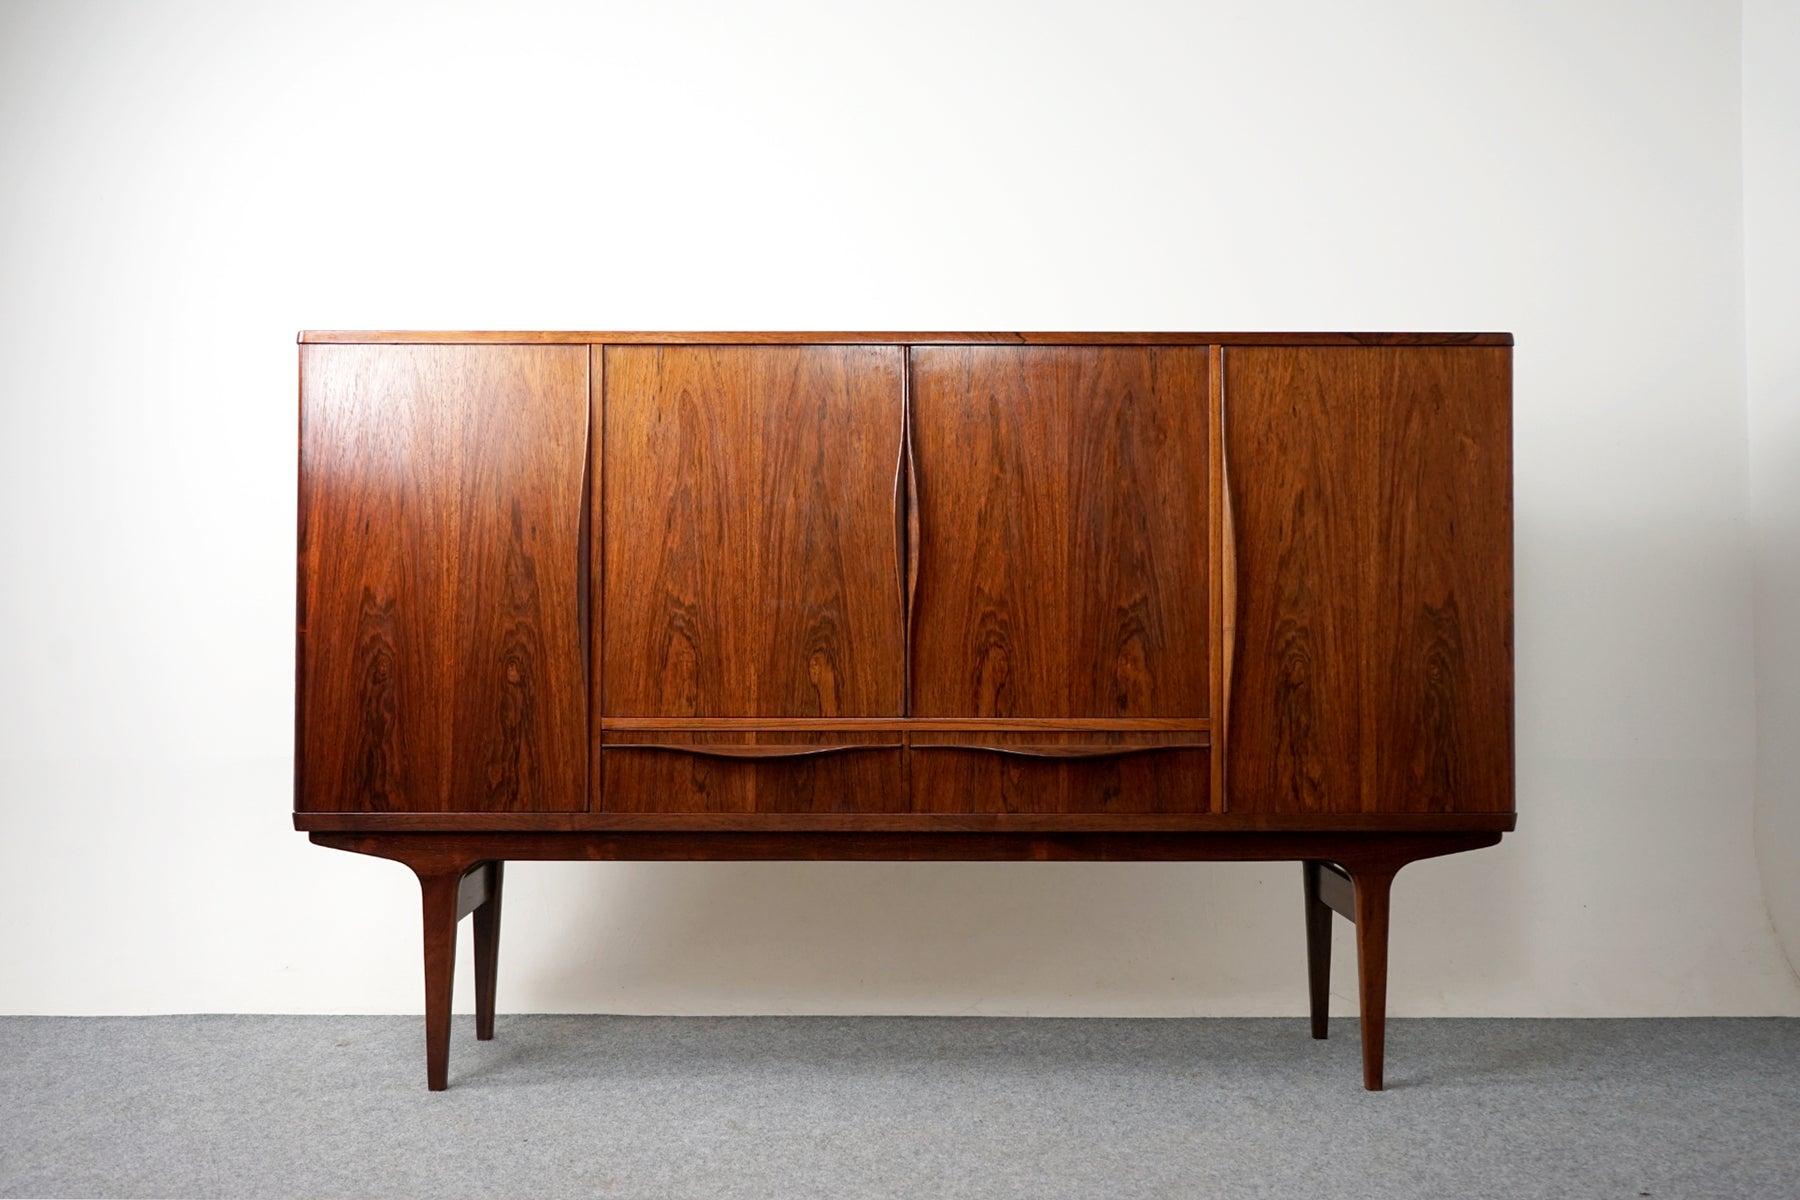 Rosewood Danish modern sideboard by LYBY Mobler, circa 1960's. A combination of sliding doors and exterior drawers offers ample storage for a variety of different uses. Clean, simple lined design highlights the exceptional book-matched veneer